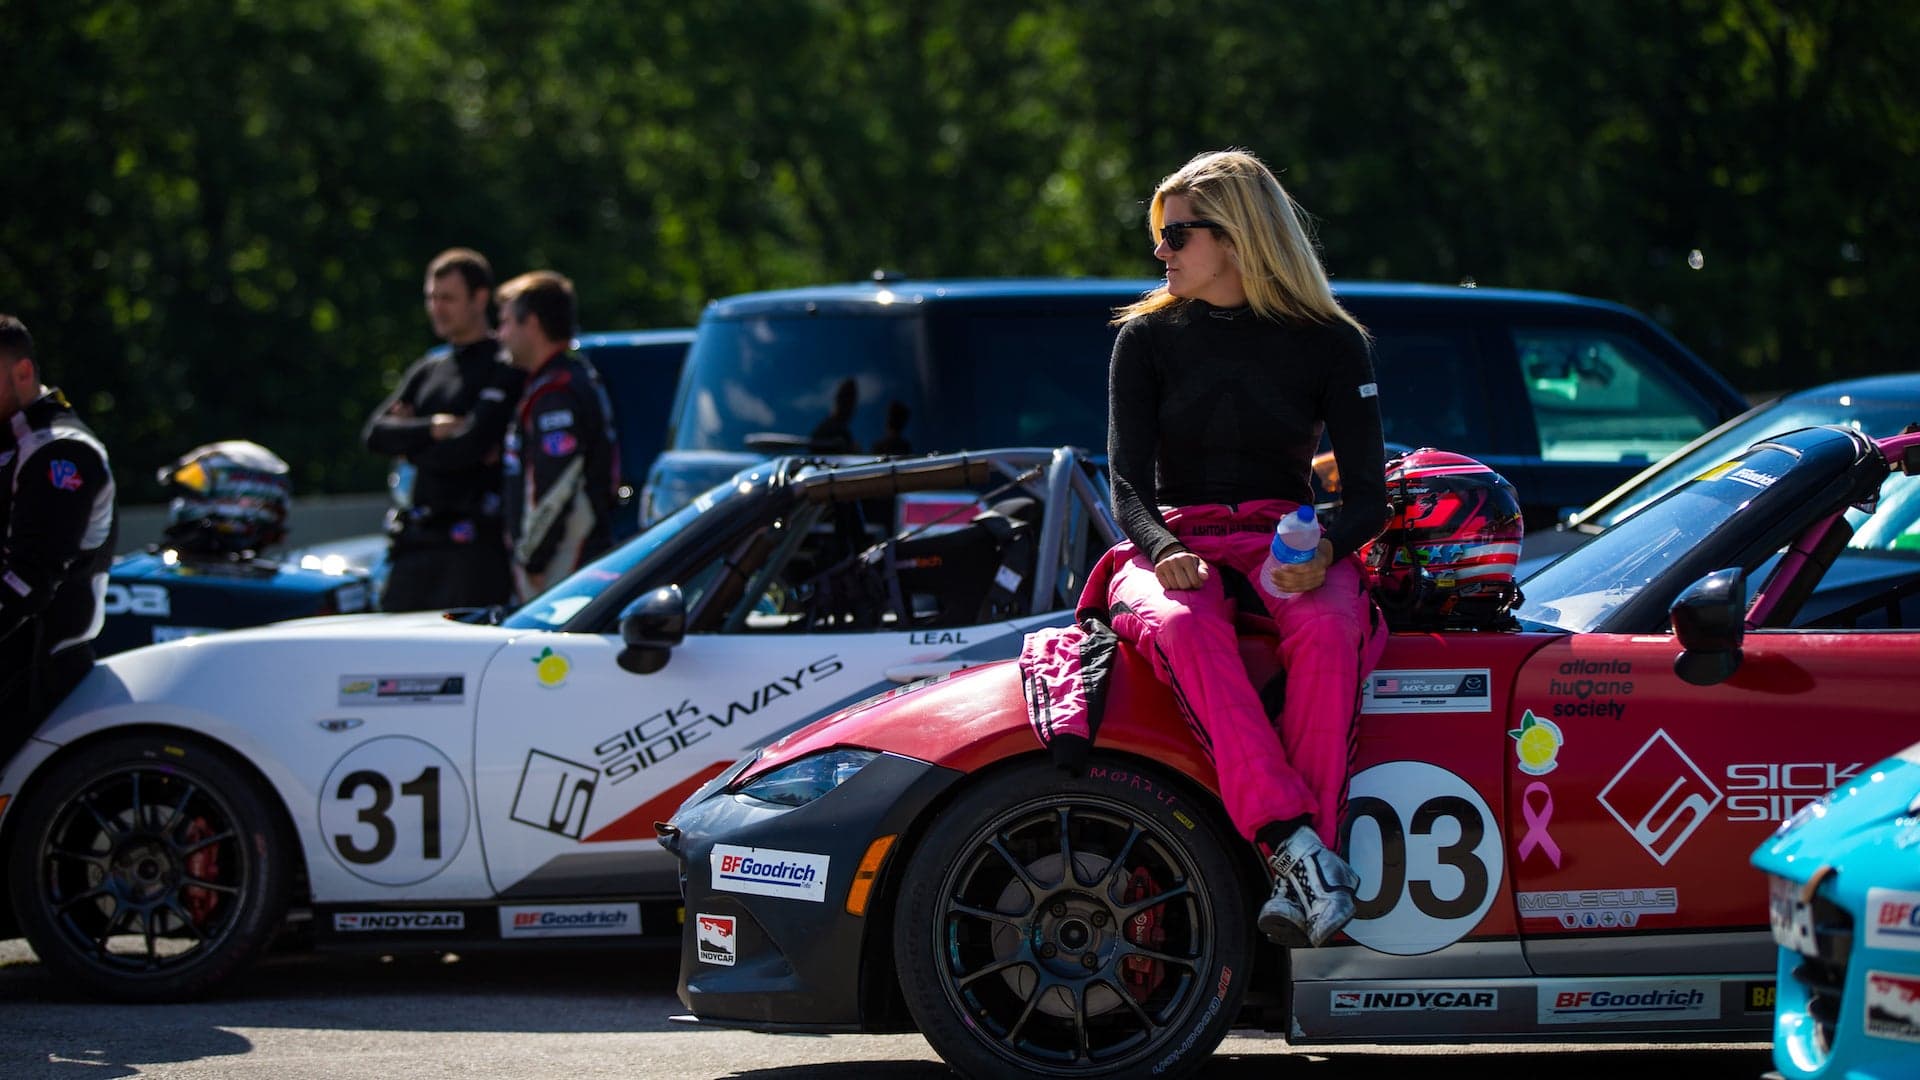 Mazda MX-5 Cup’s Ashton Harrison Is a Fierce Female Racer With Some Fancy Footwork